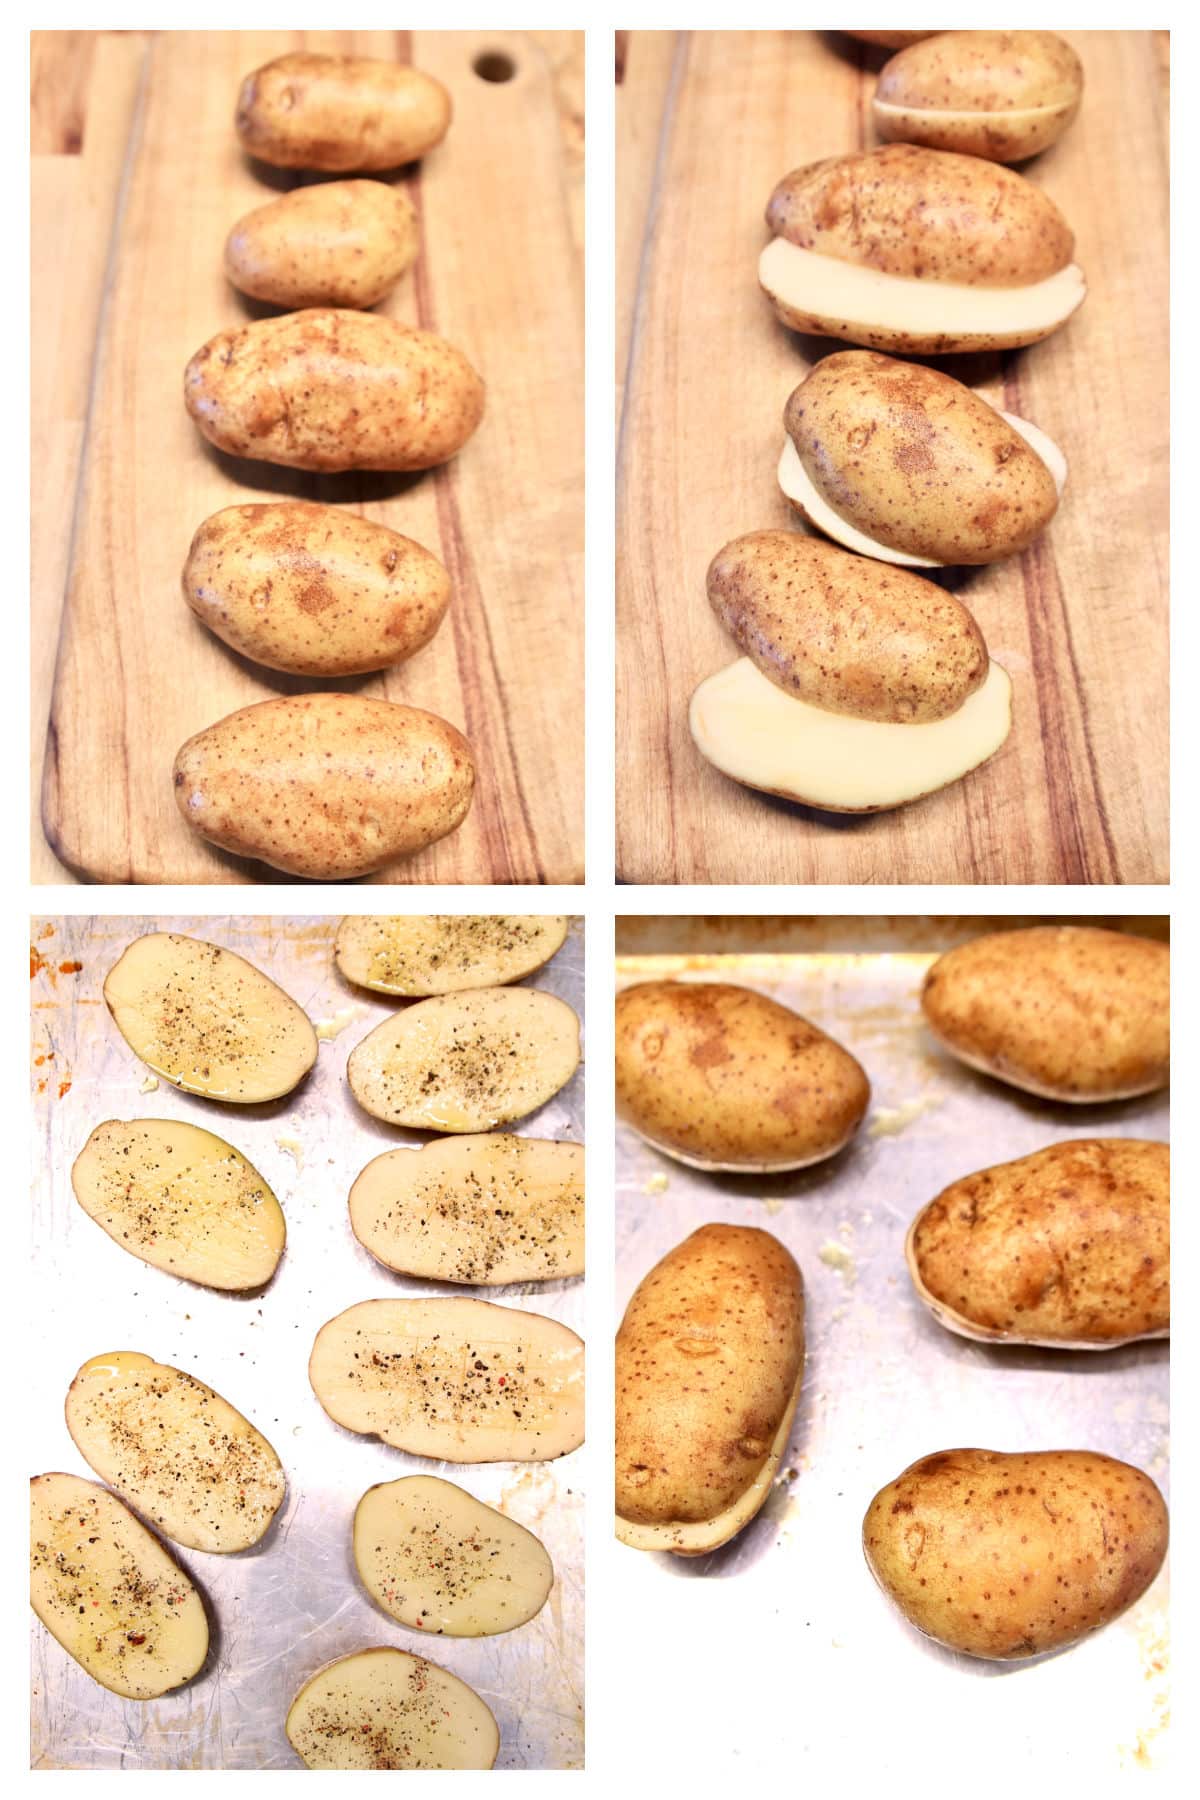 Collage of russet potatoes - cut in half, seasoned, pressed together.